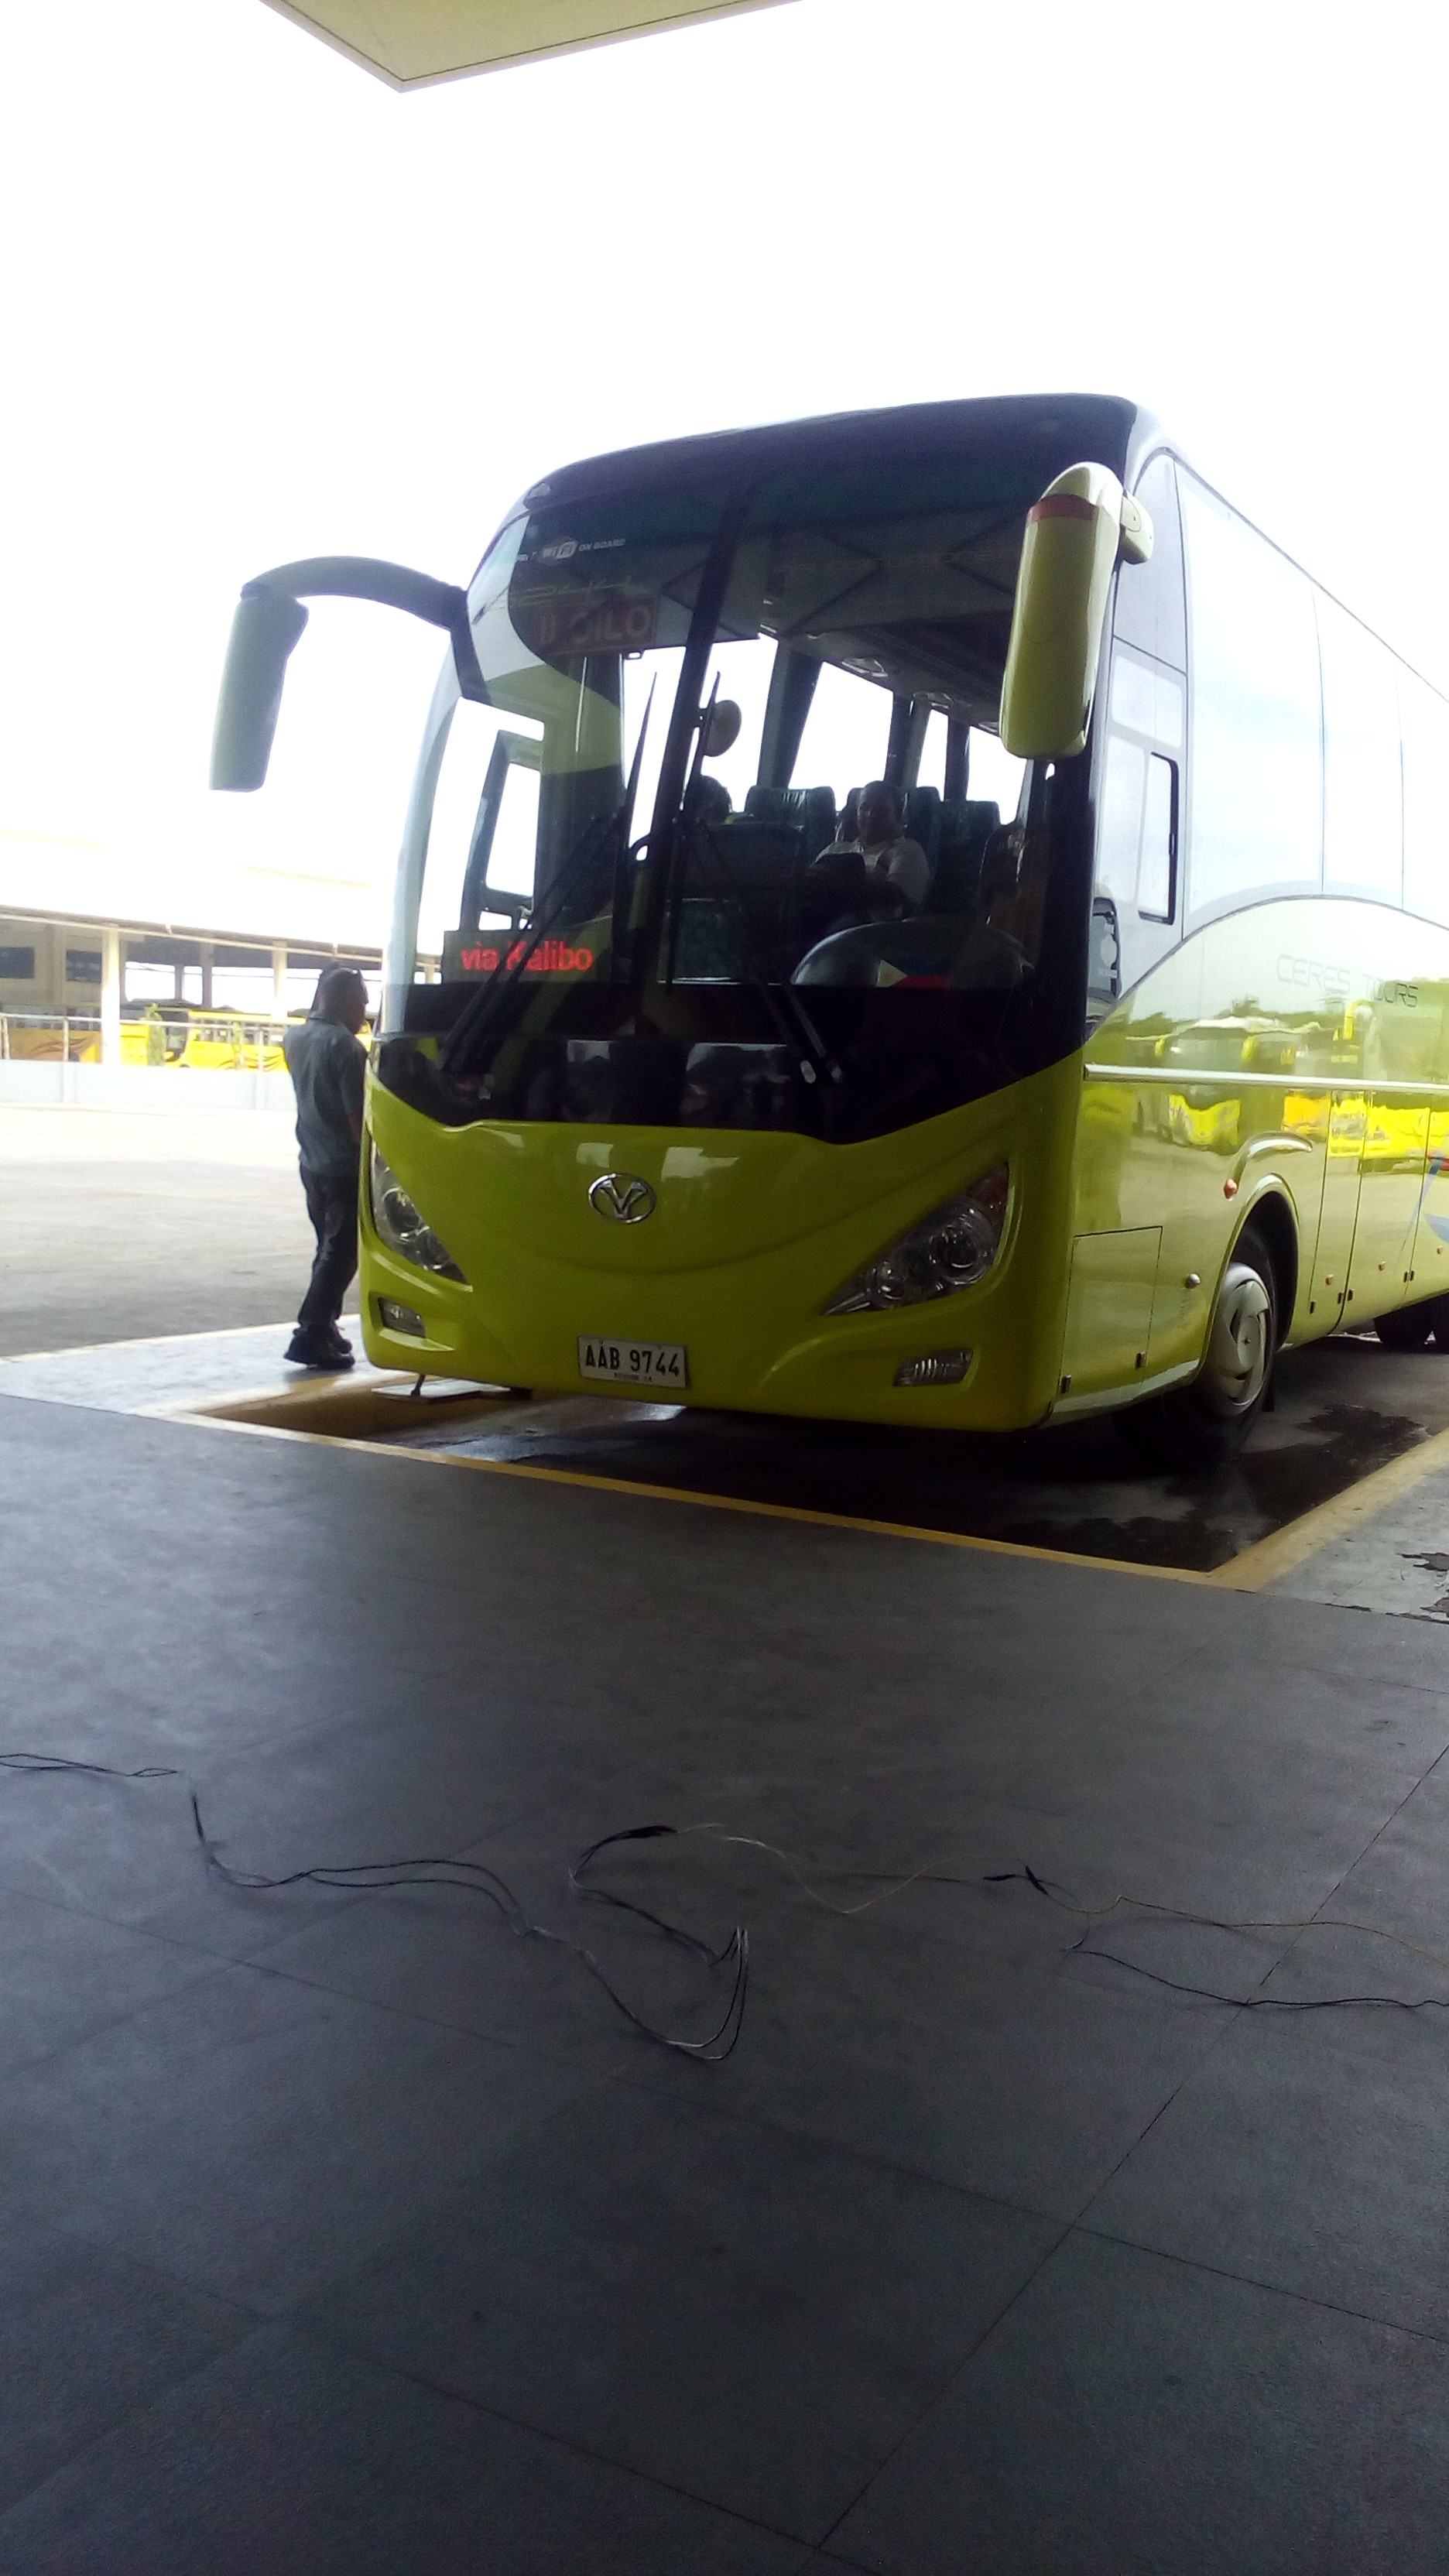 Taking the Bus from Iloilo to Boracay via Caticlan